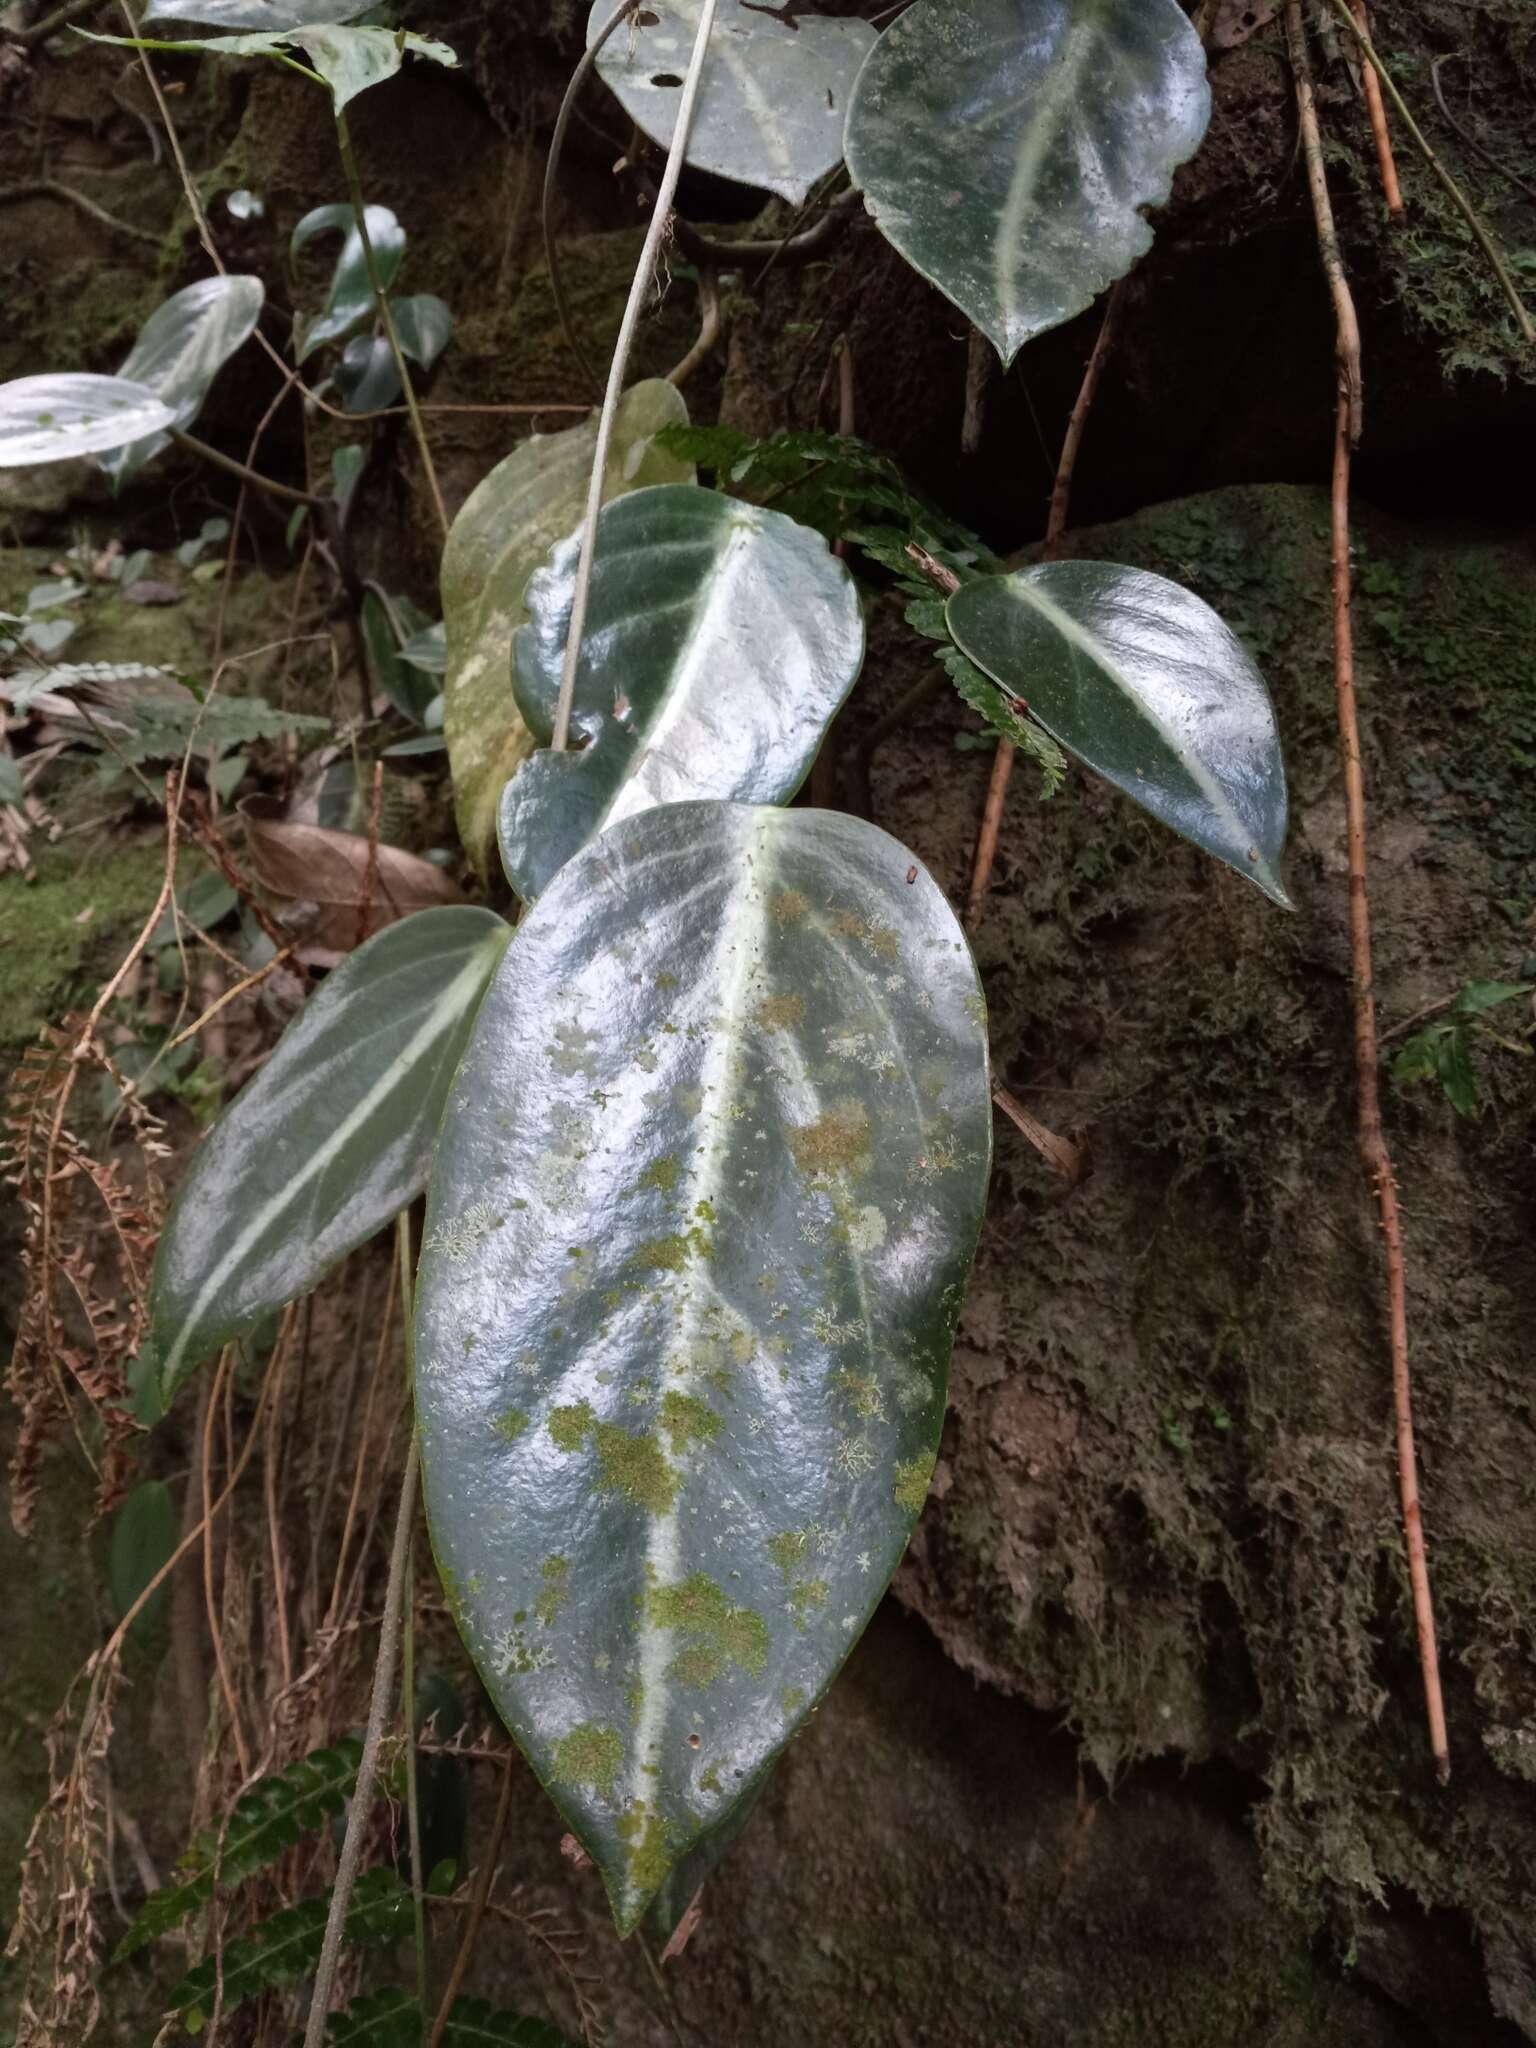 Image of spotted peperomia